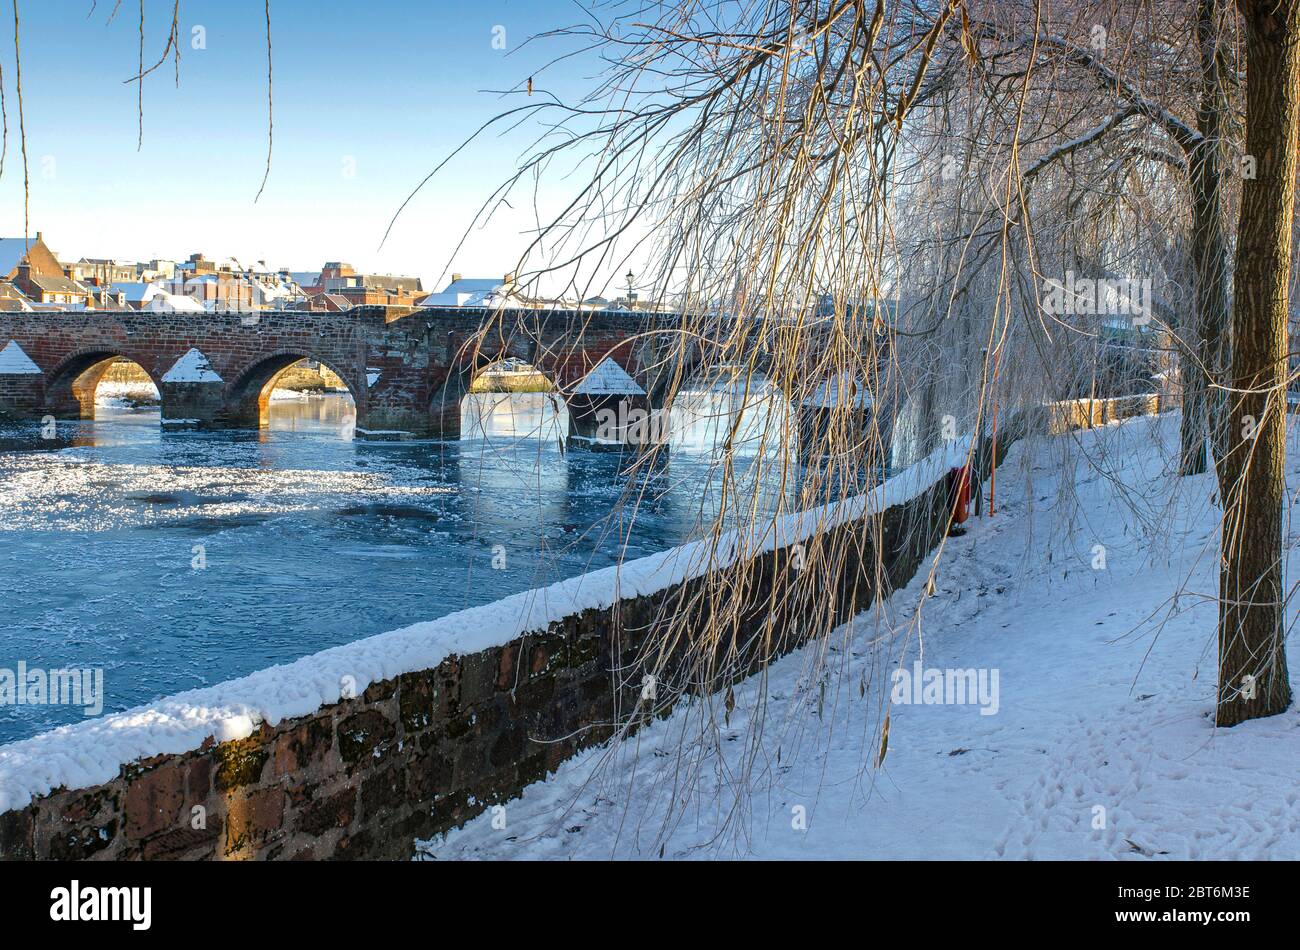 View of Auld Brig Dumfries Town and River Nith  in snowy winter conditions Stock Photo